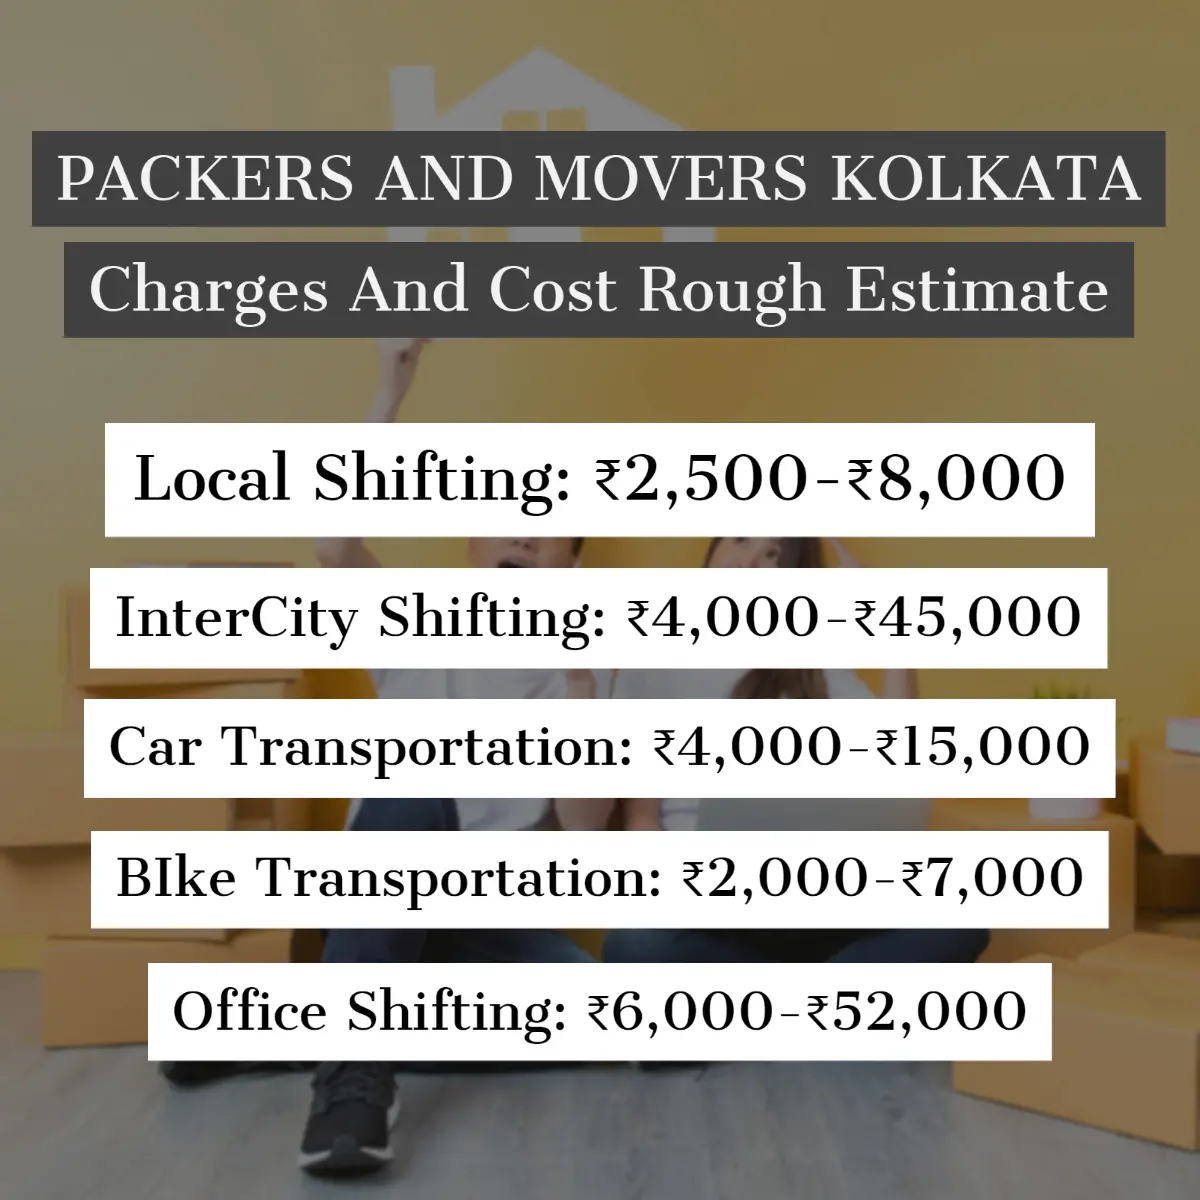 Packers and Movers Kolkata Charges